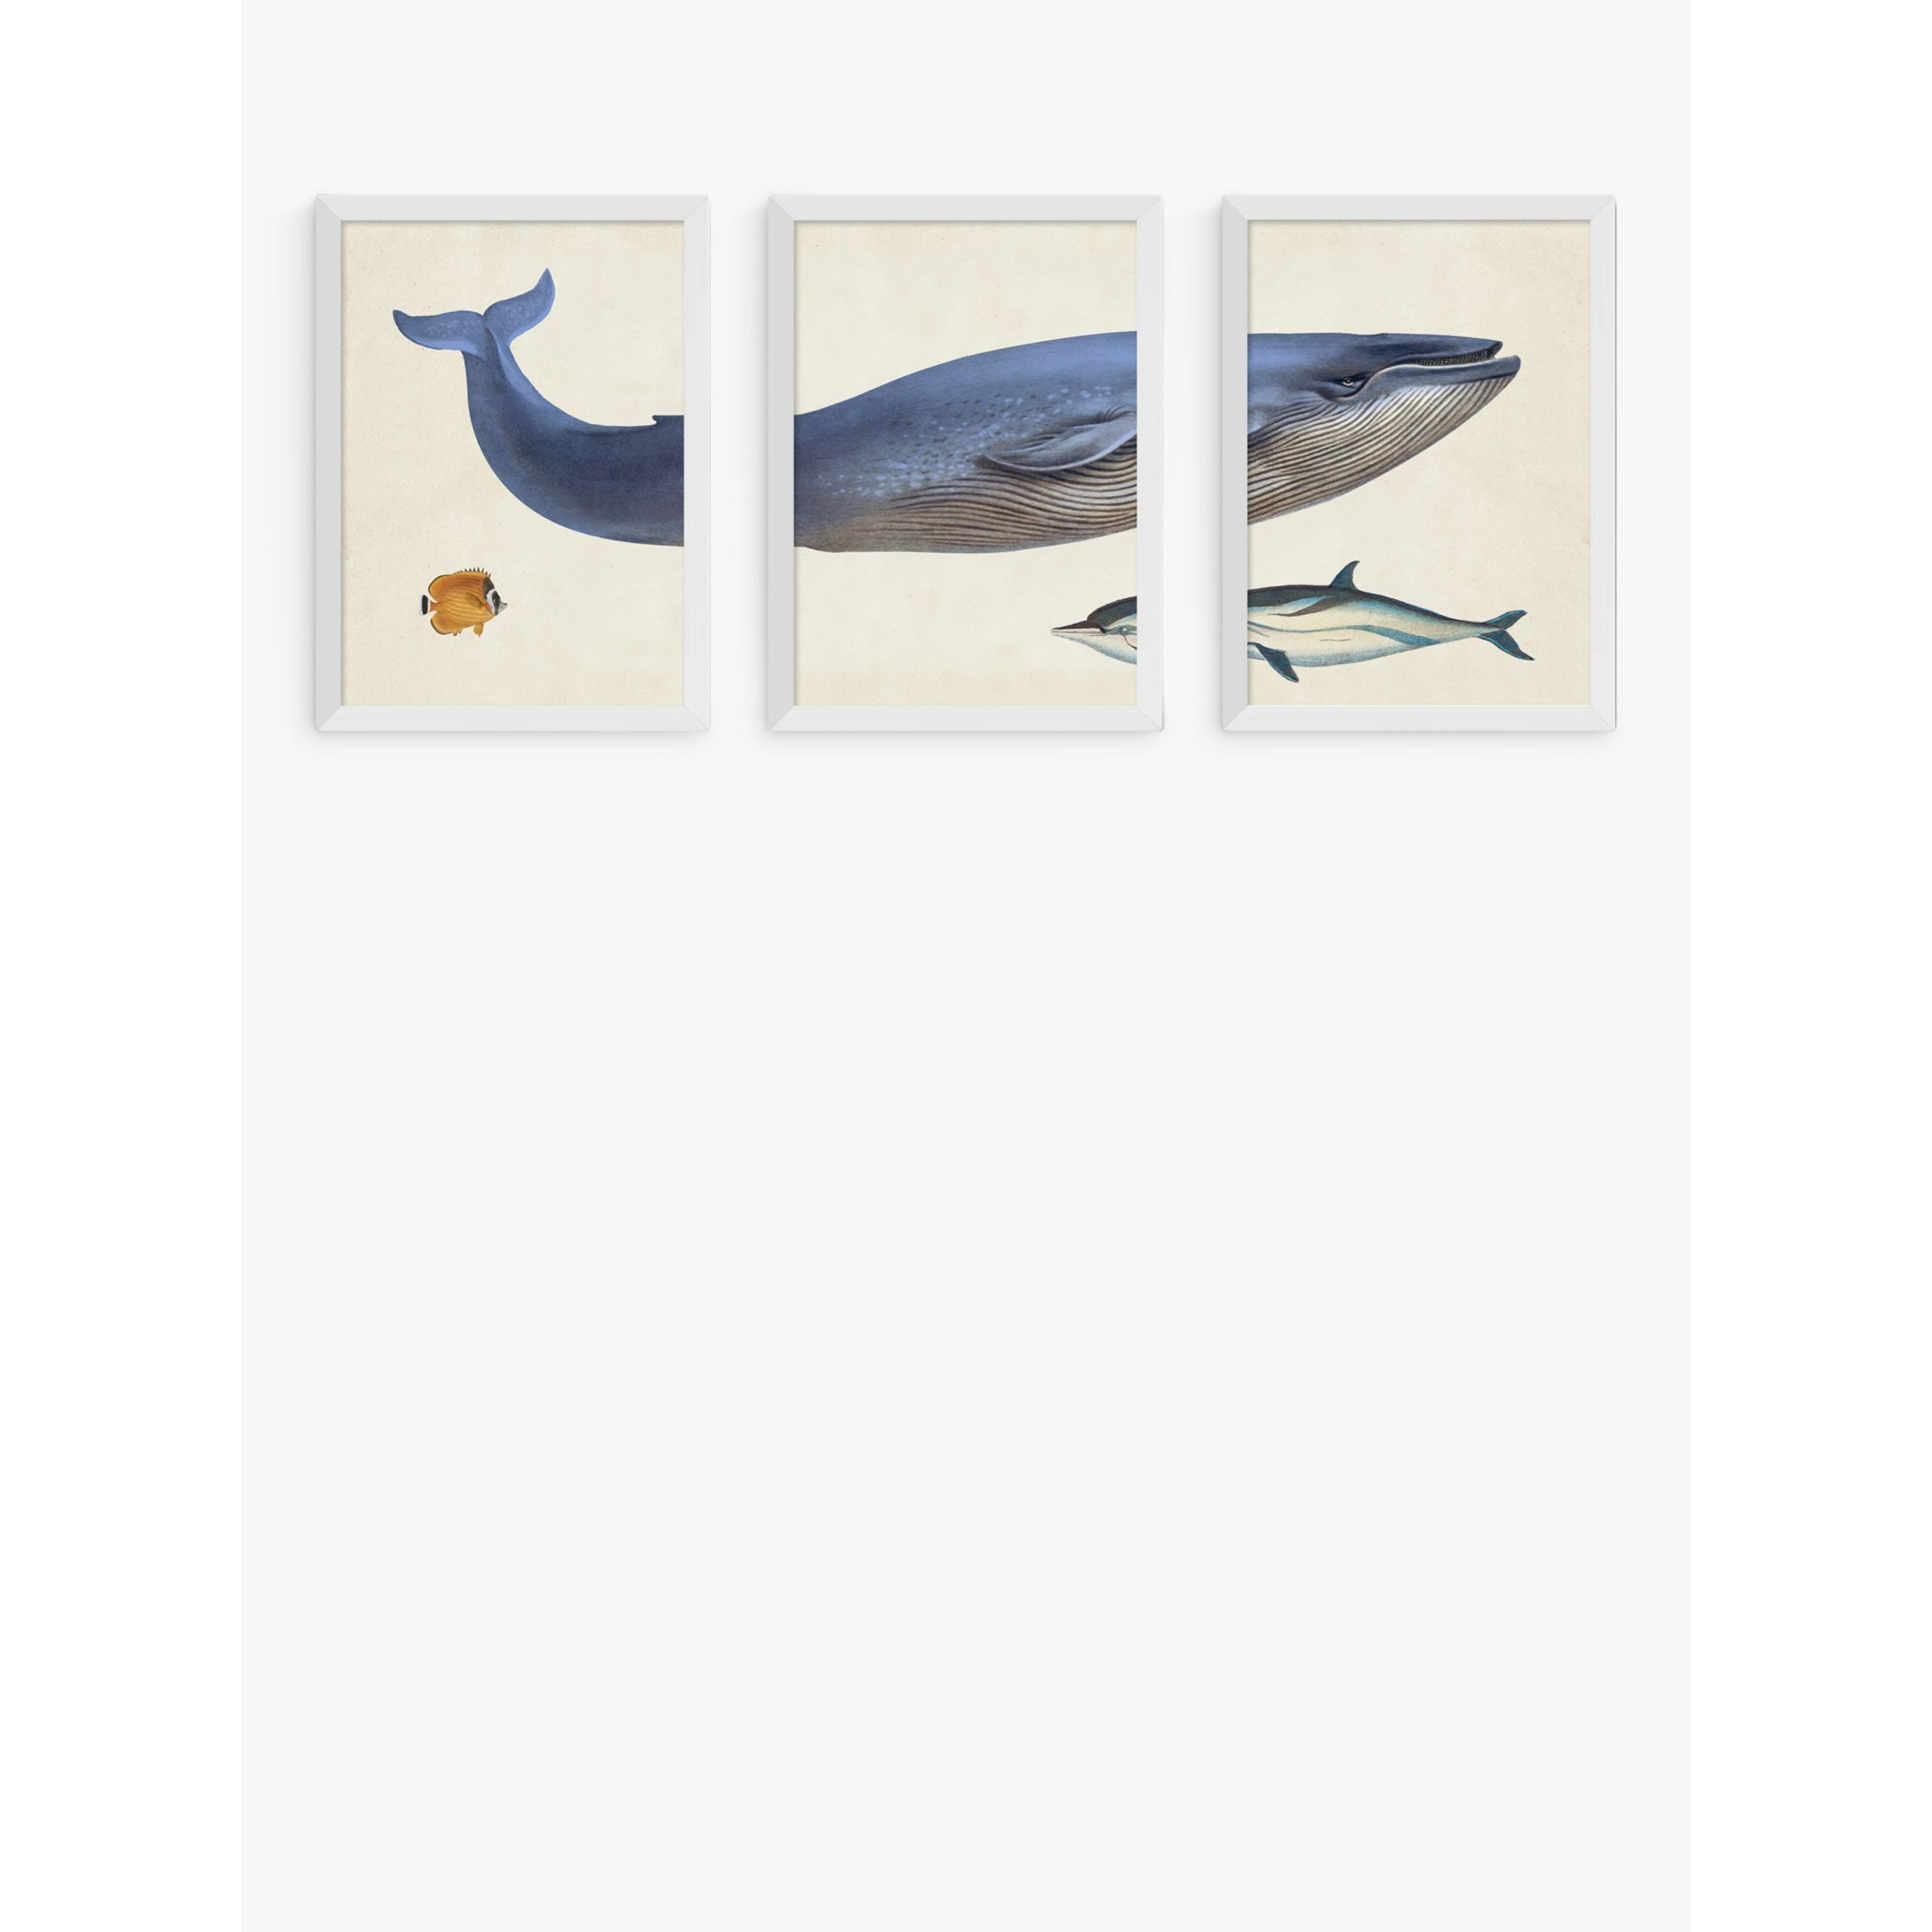 EAST END PRINTS Natural History Museum 'Whale' Framed Print, Set of 3 - image 1